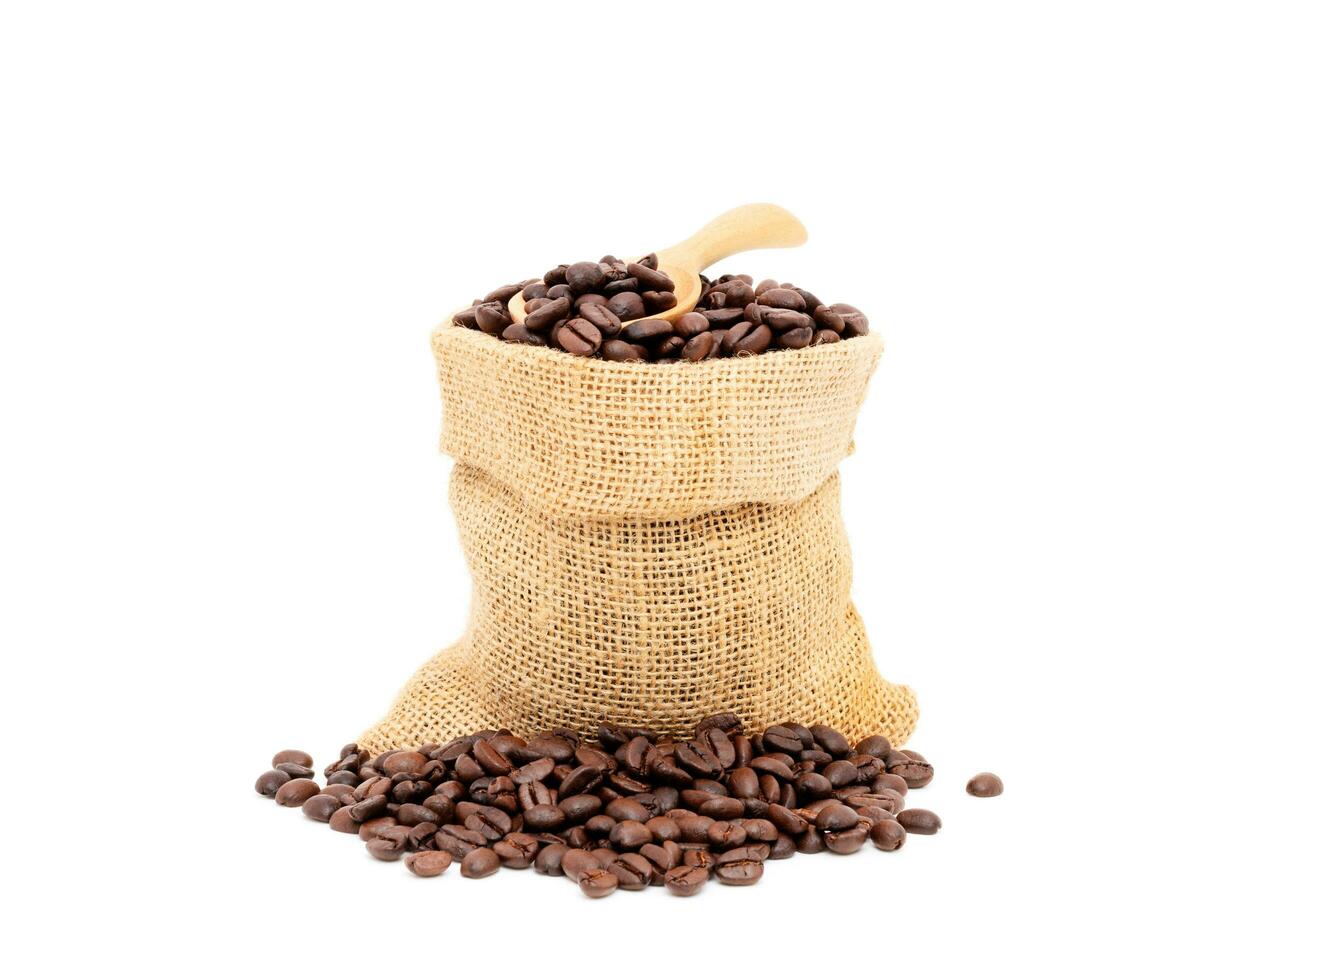 Heap of brown roasted coffee beans in burlap bags isolated on white background. fresh coffee beans concept photo